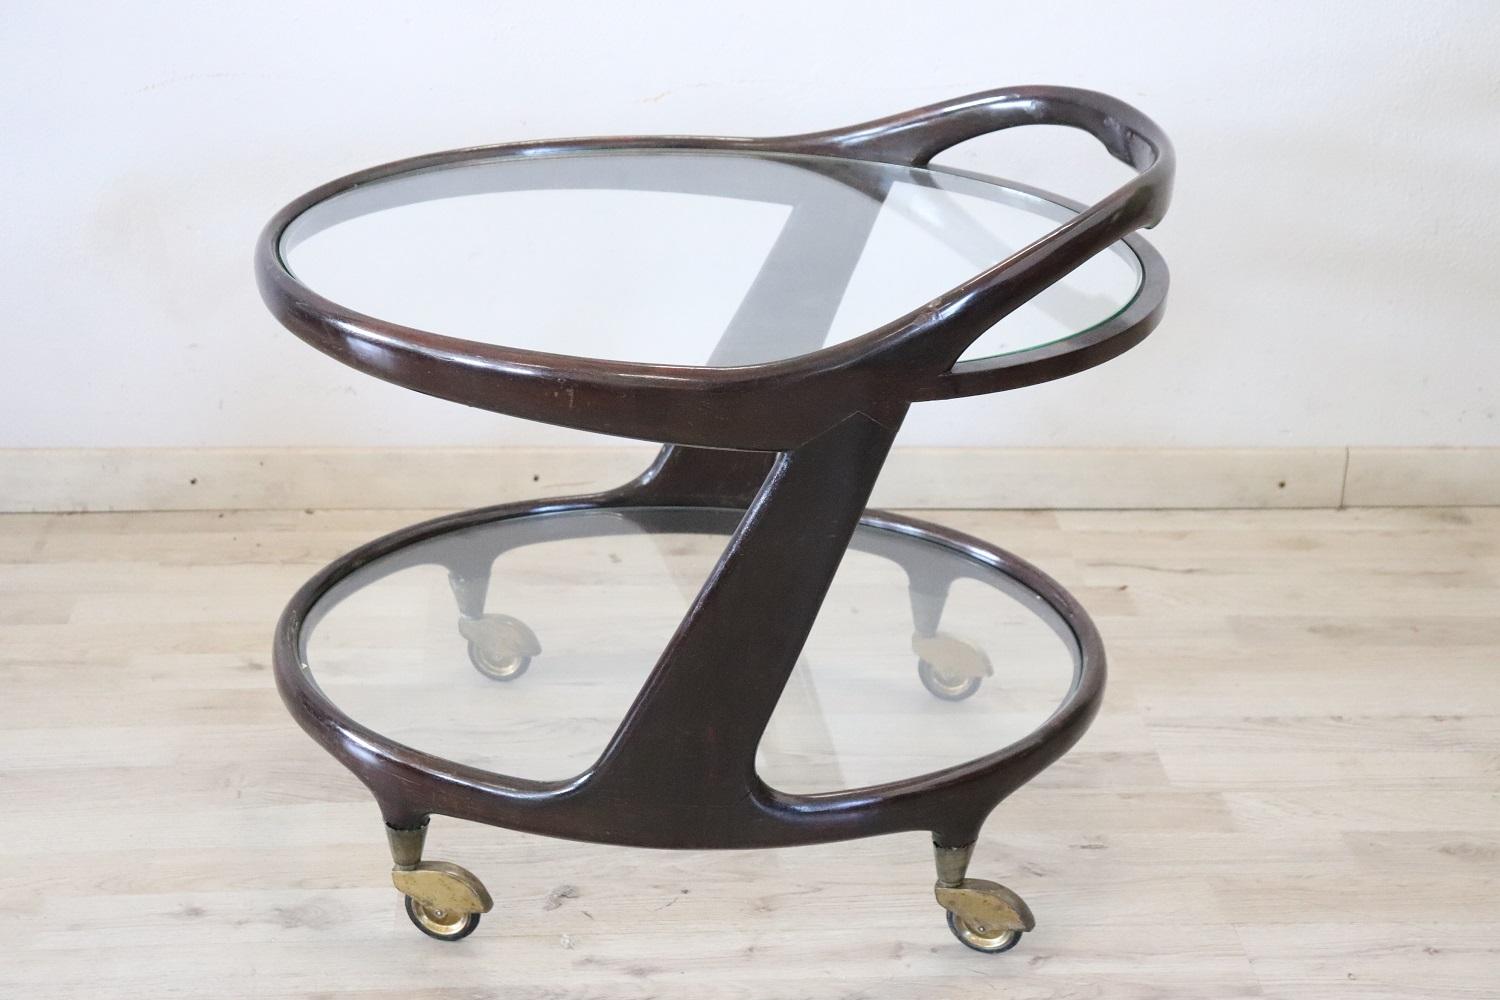 Rare 1950s Italian desgin by Cesare Lacca serving bar cart. Made of curved beech wood equipped with two glass shelves and brass wheels for convenient movement. Perfect for serving drinks to your guests.